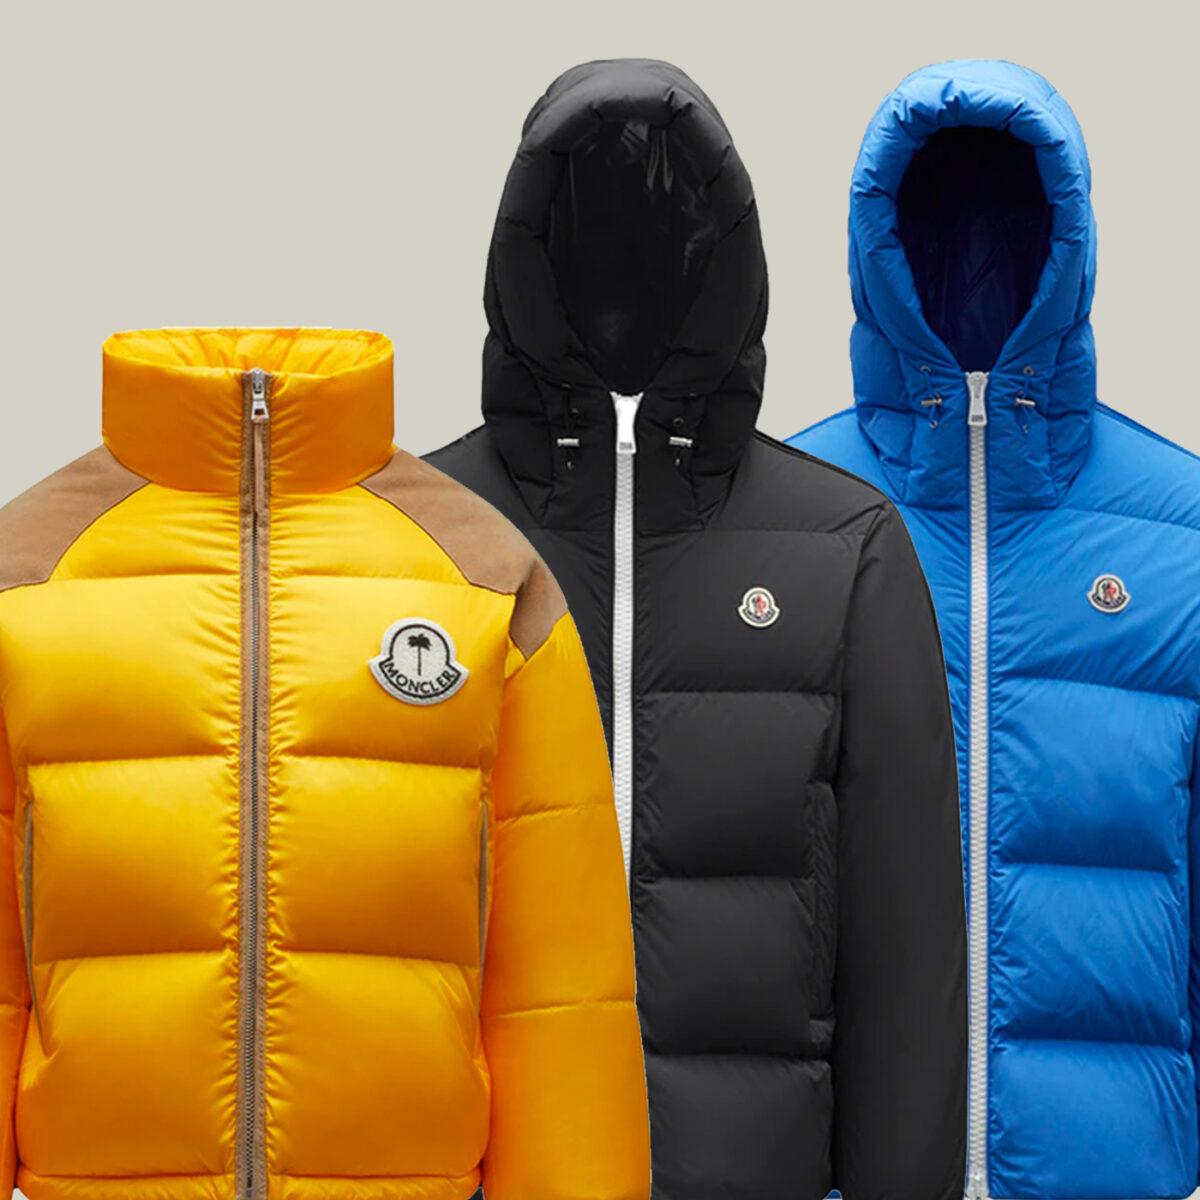 history of moncler